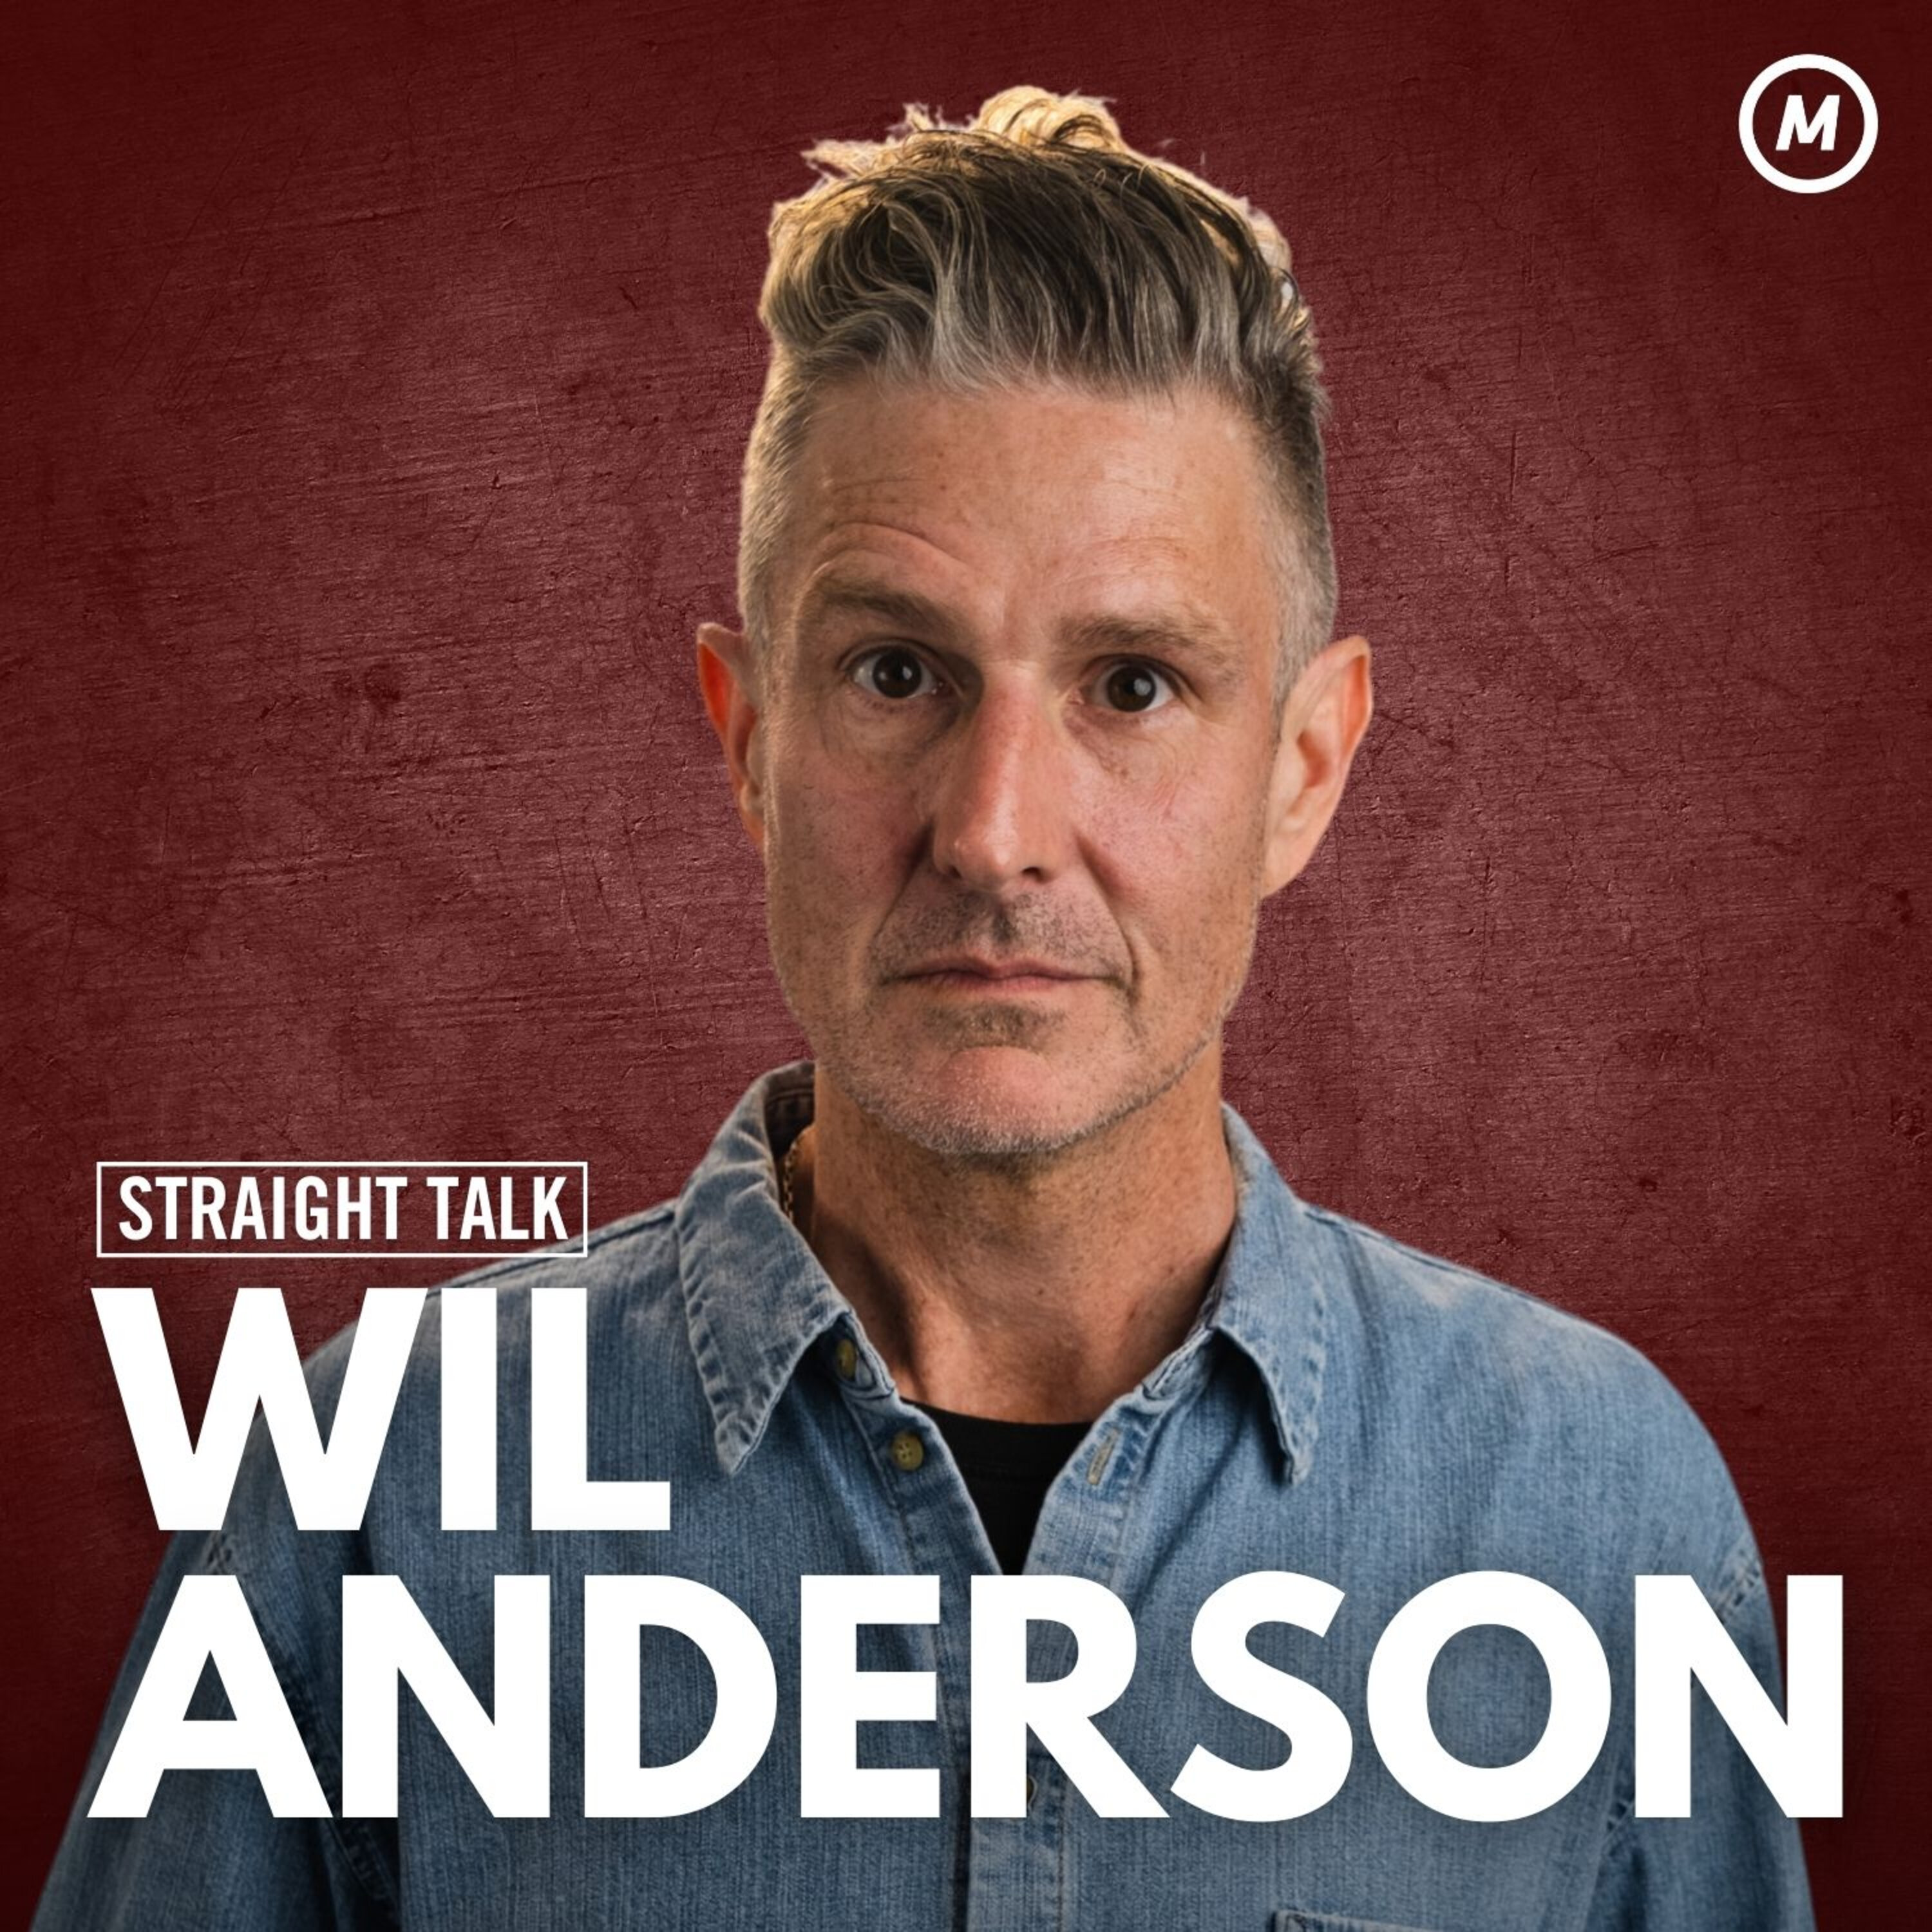 #53 Comedian Wil Anderson: I don’t have confidence but I do things anyway